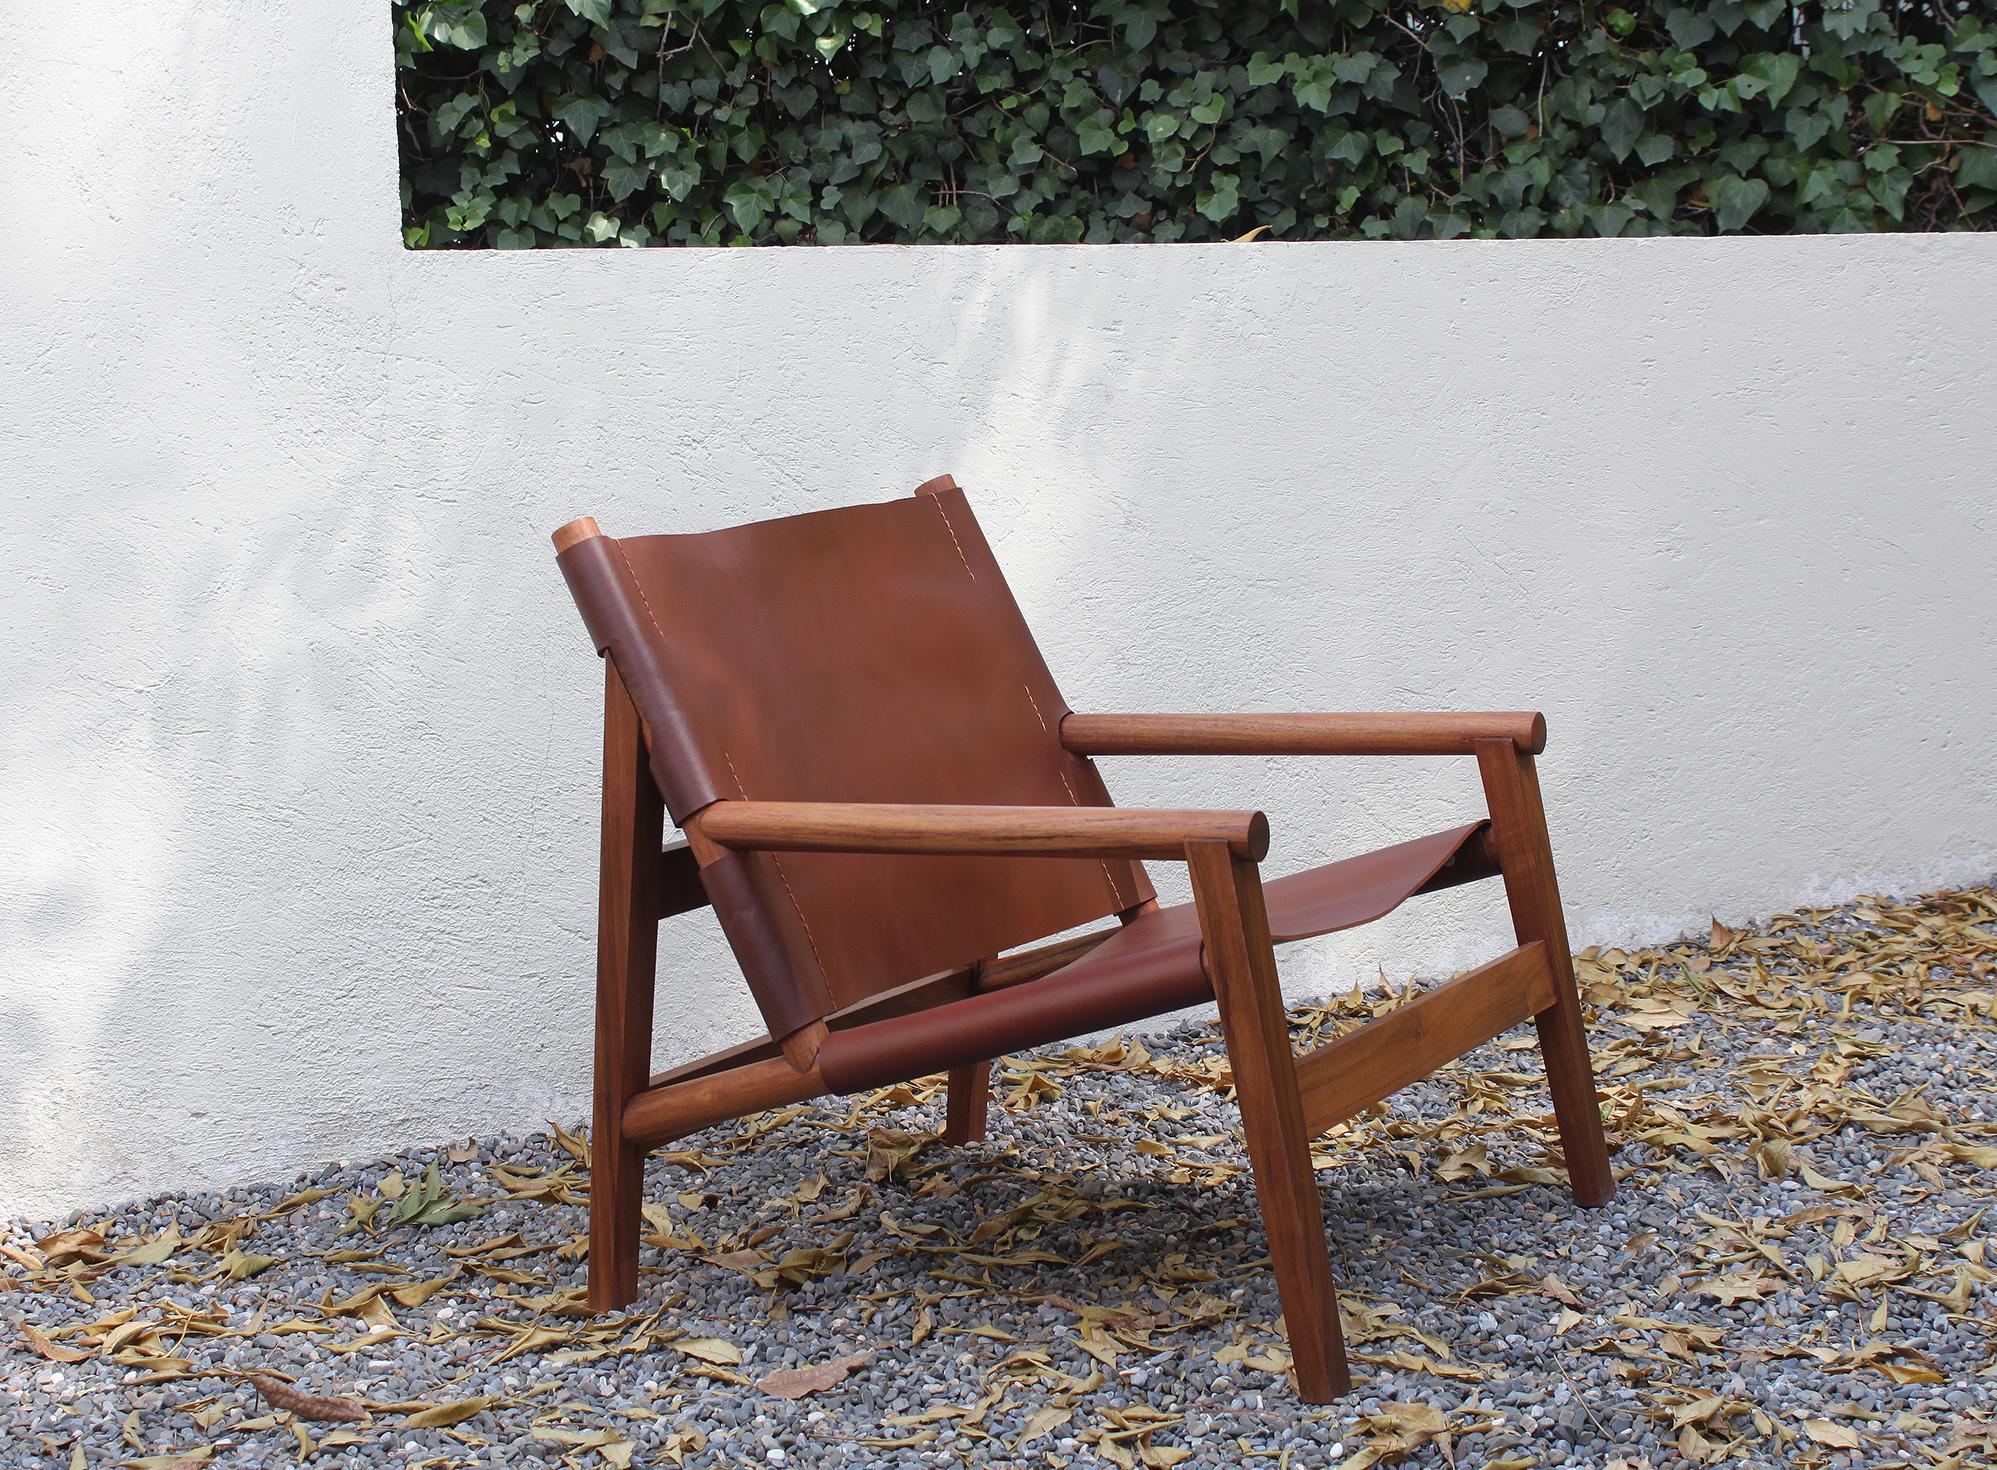 La Colima Chair, Maria Beckmann, Represented by Tuleste Factory 7